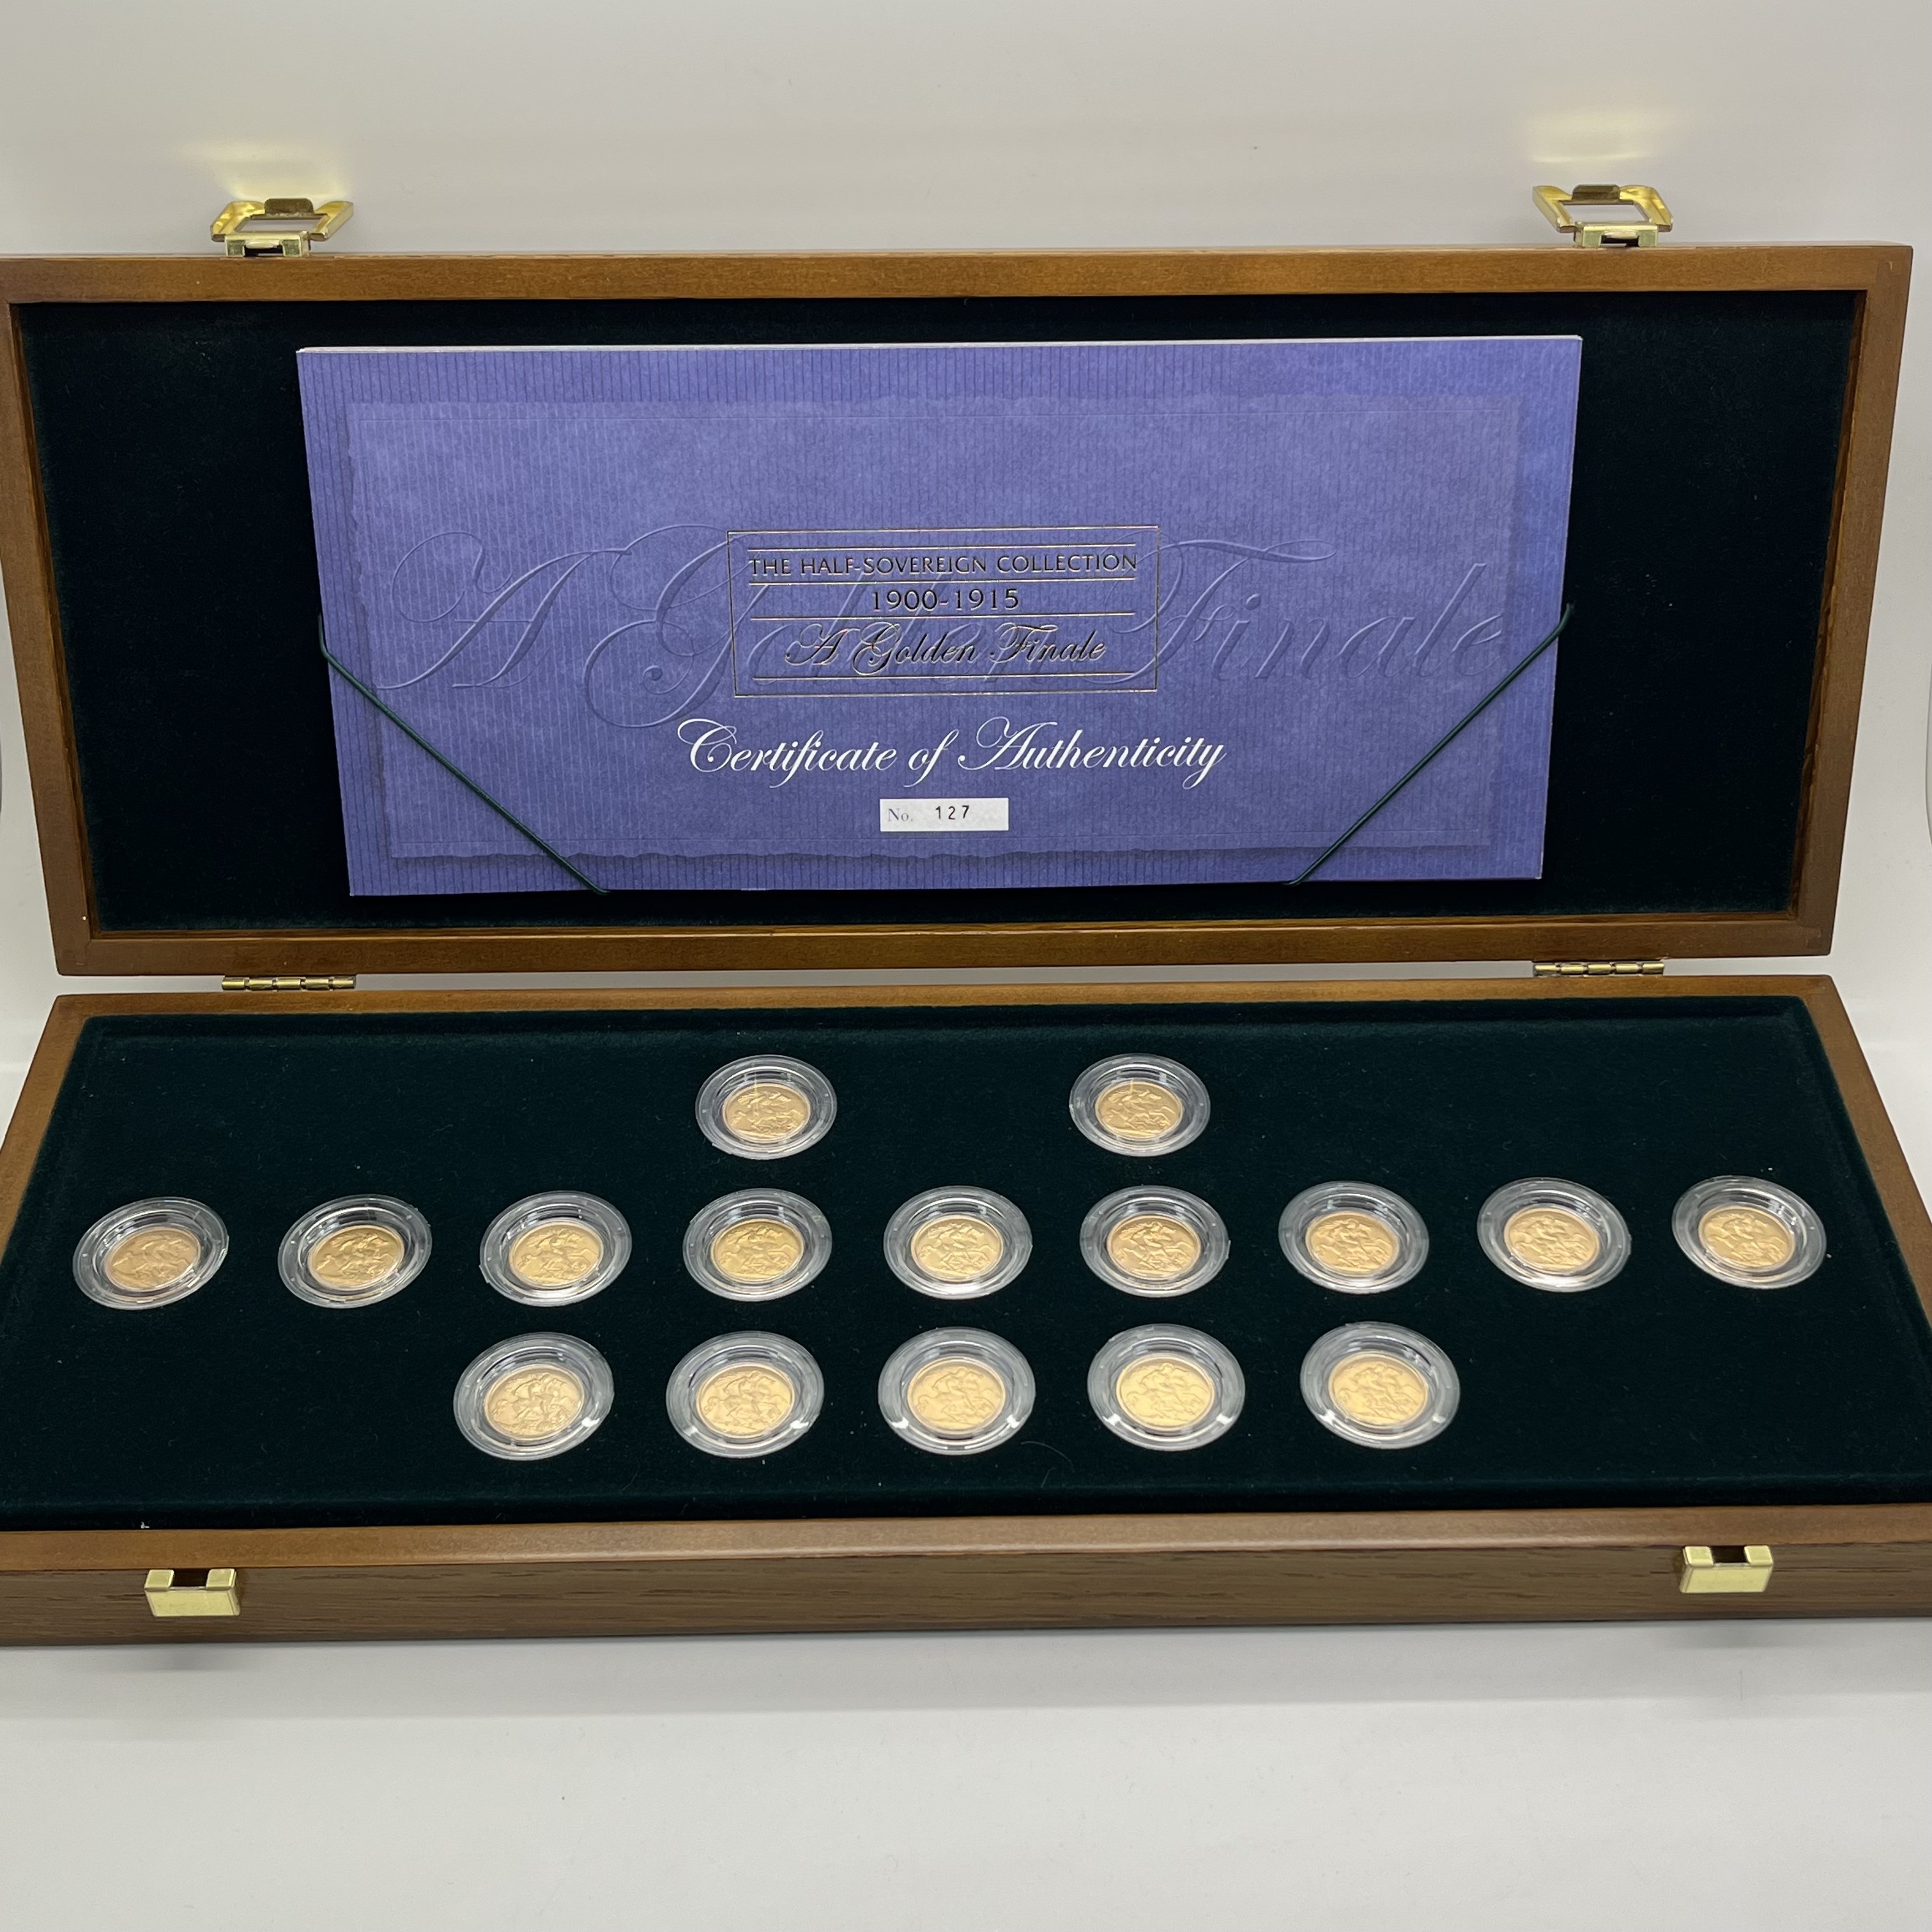 Royal Mint 1900 - 1915 Gold Half Sovereign Golden Finale Coin Set, sixteen coins in total, in wooden